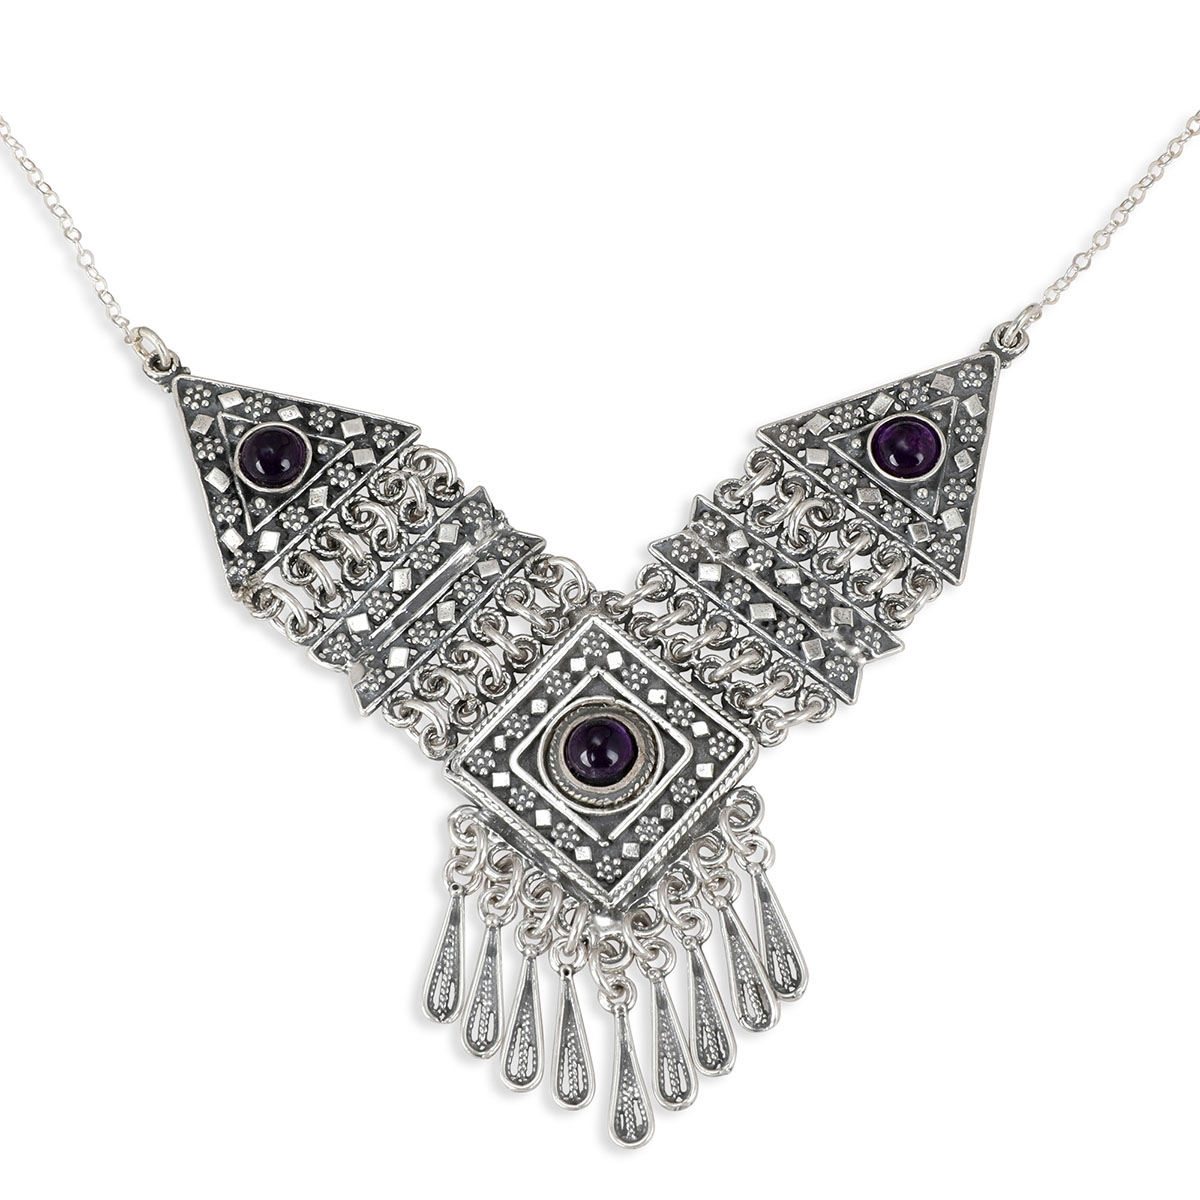 Traditional Yemenite Art Handcrafted Sterling Silver Necklace With Amethyst Stones - 1